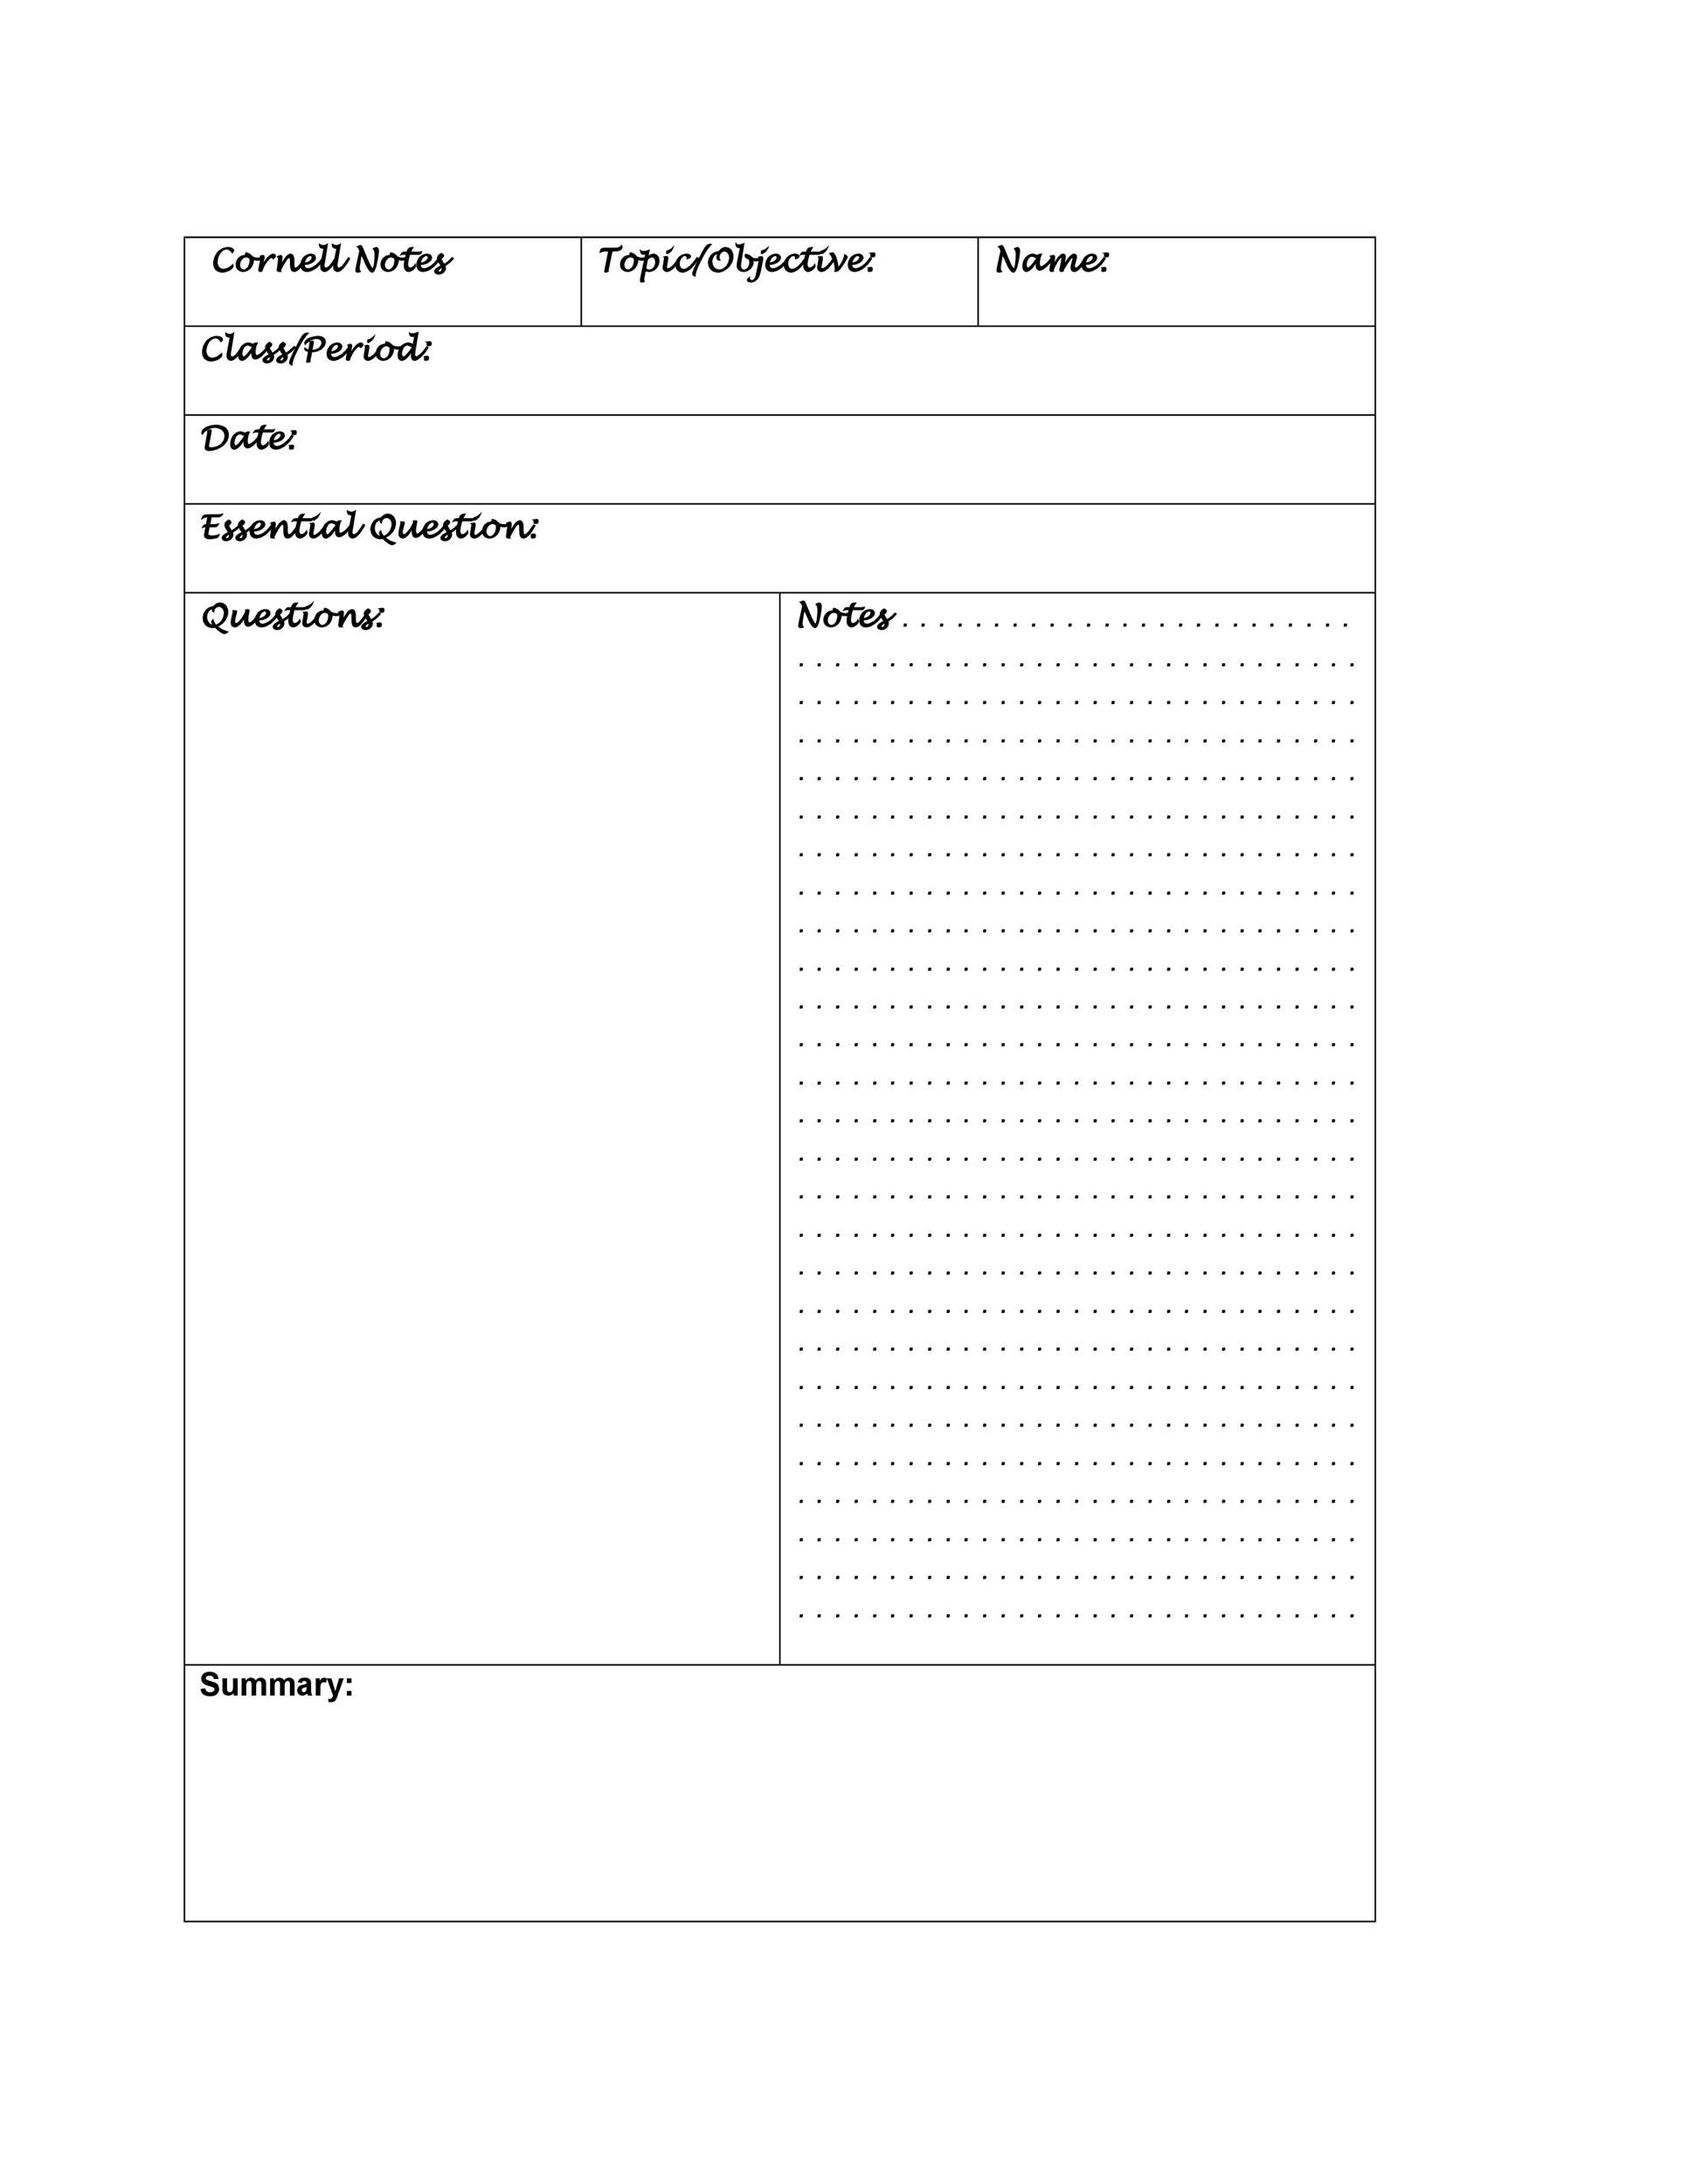 Free Cornell Notes Template 08